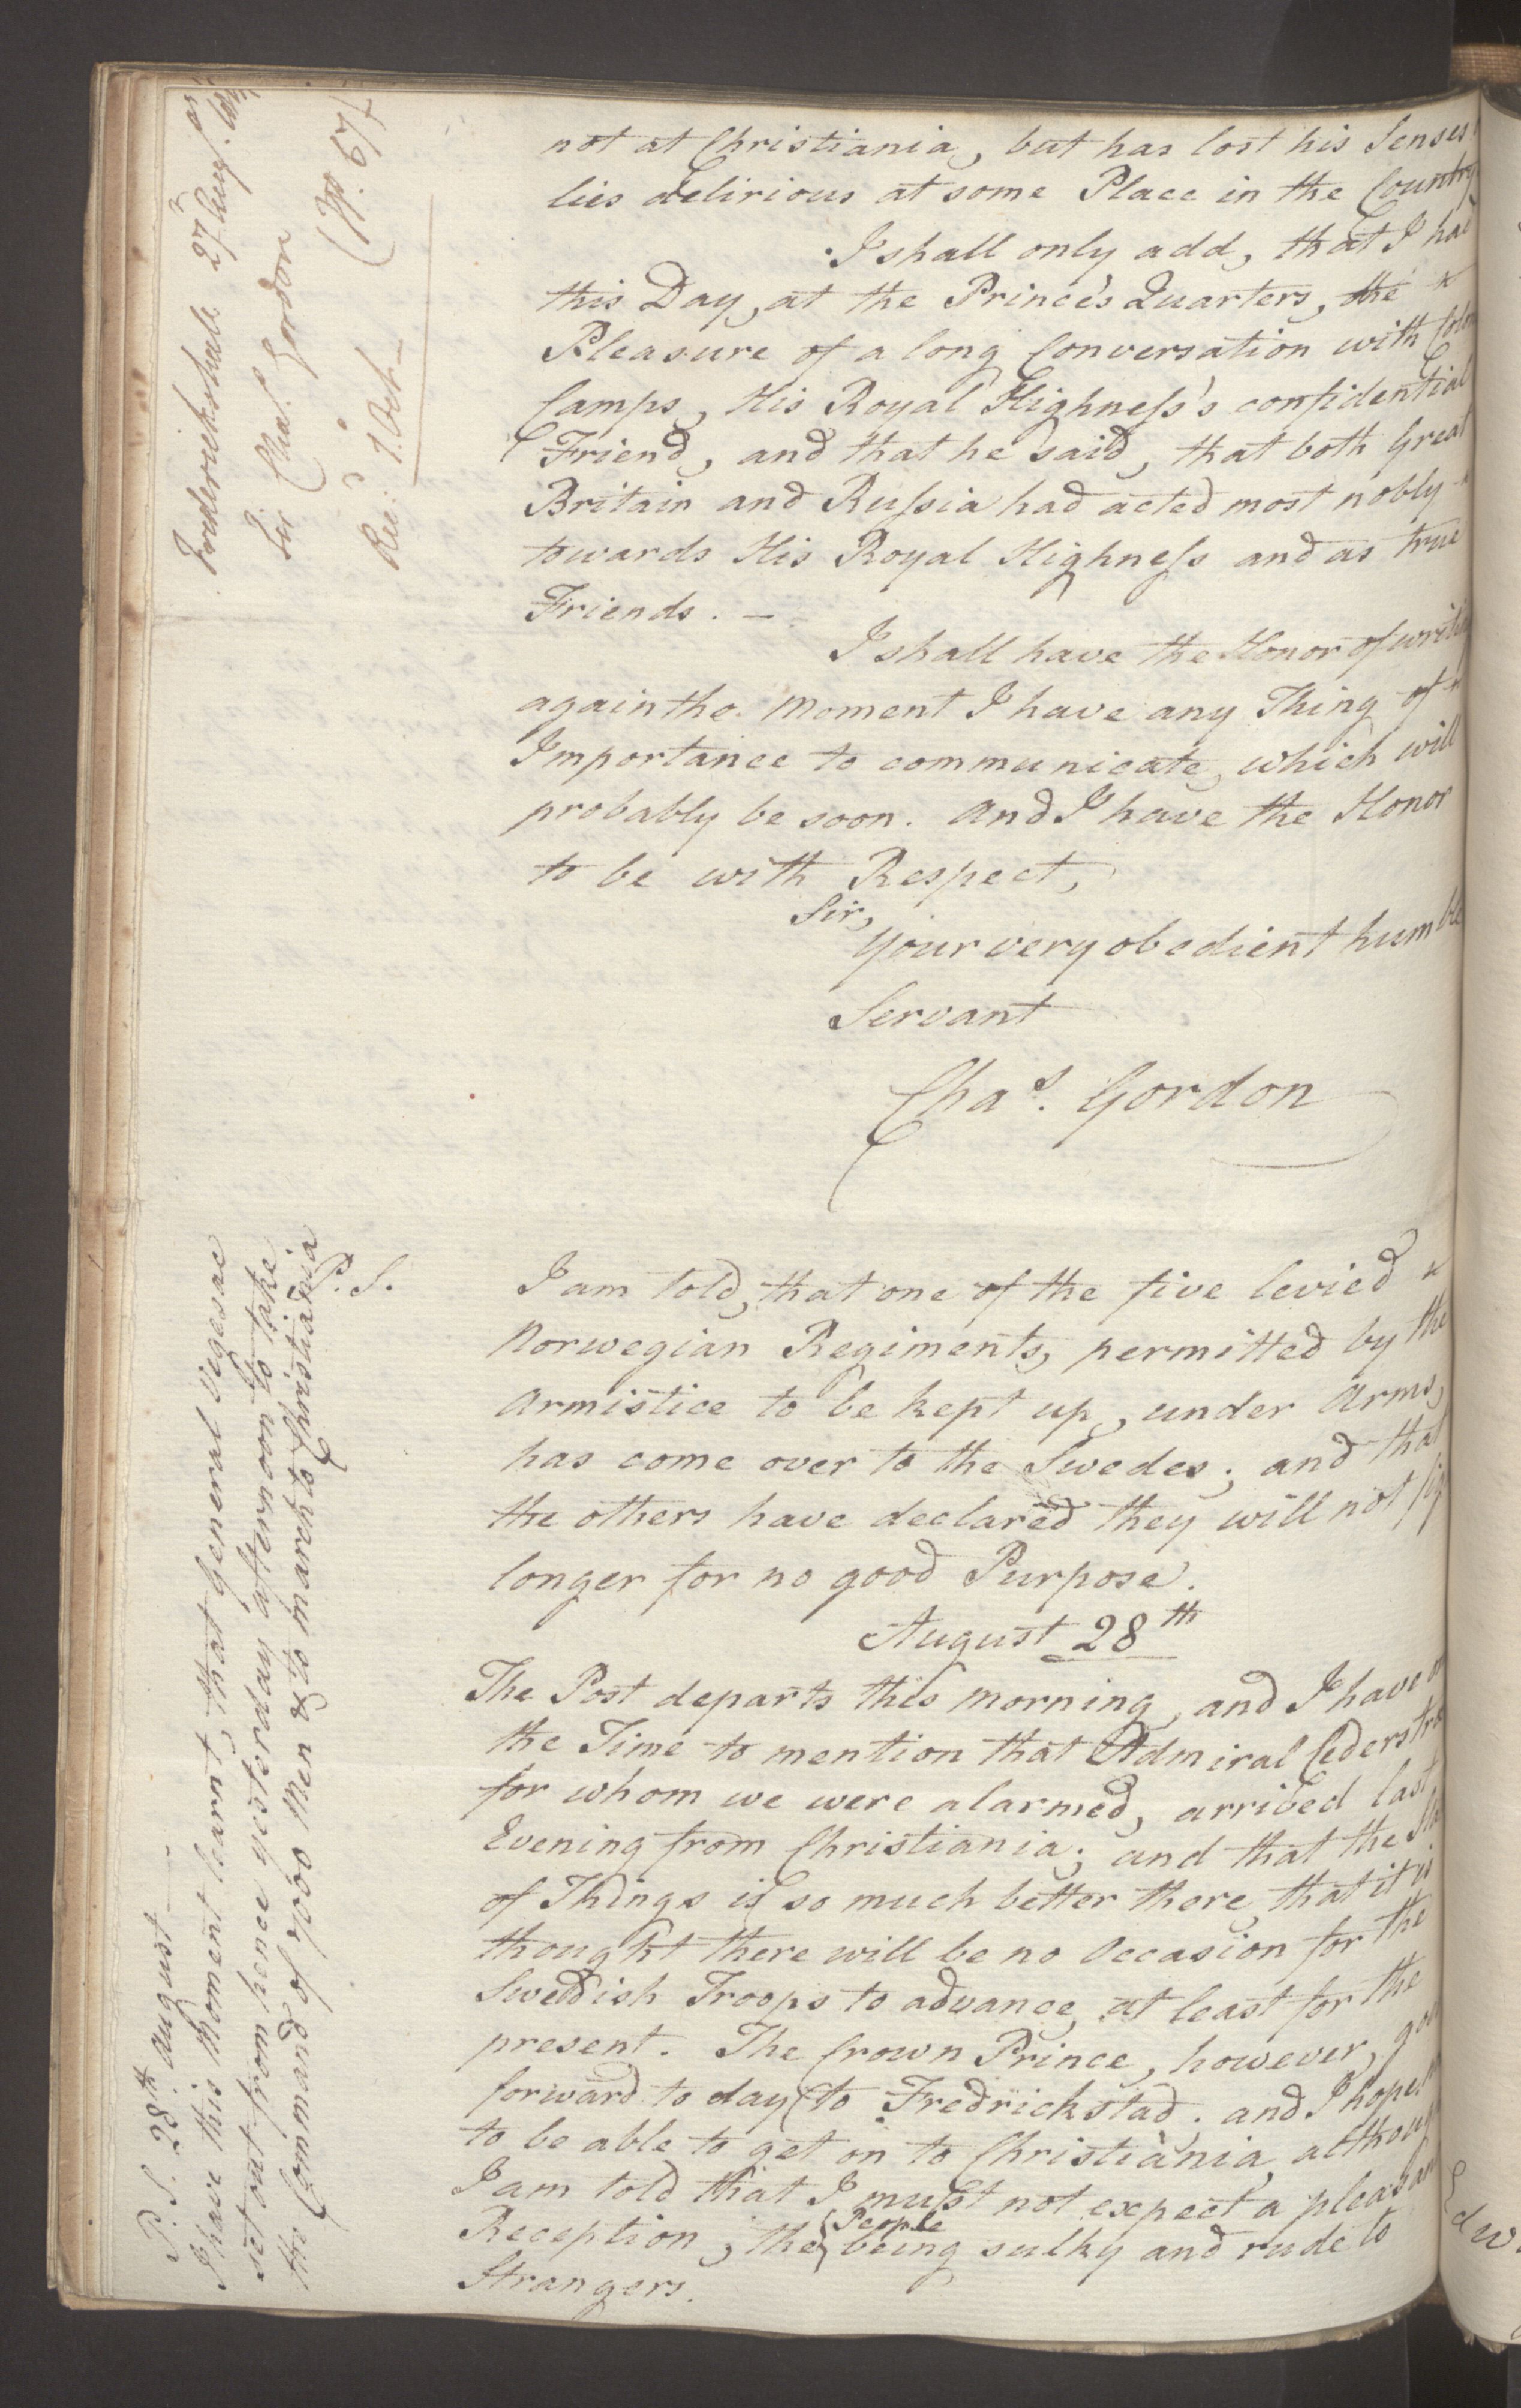 Foreign Office*, UKA/-/FO 38/16: Sir C. Gordon. Reports from Malmö, Jonkoping, and Helsingborg, 1814, p. 102